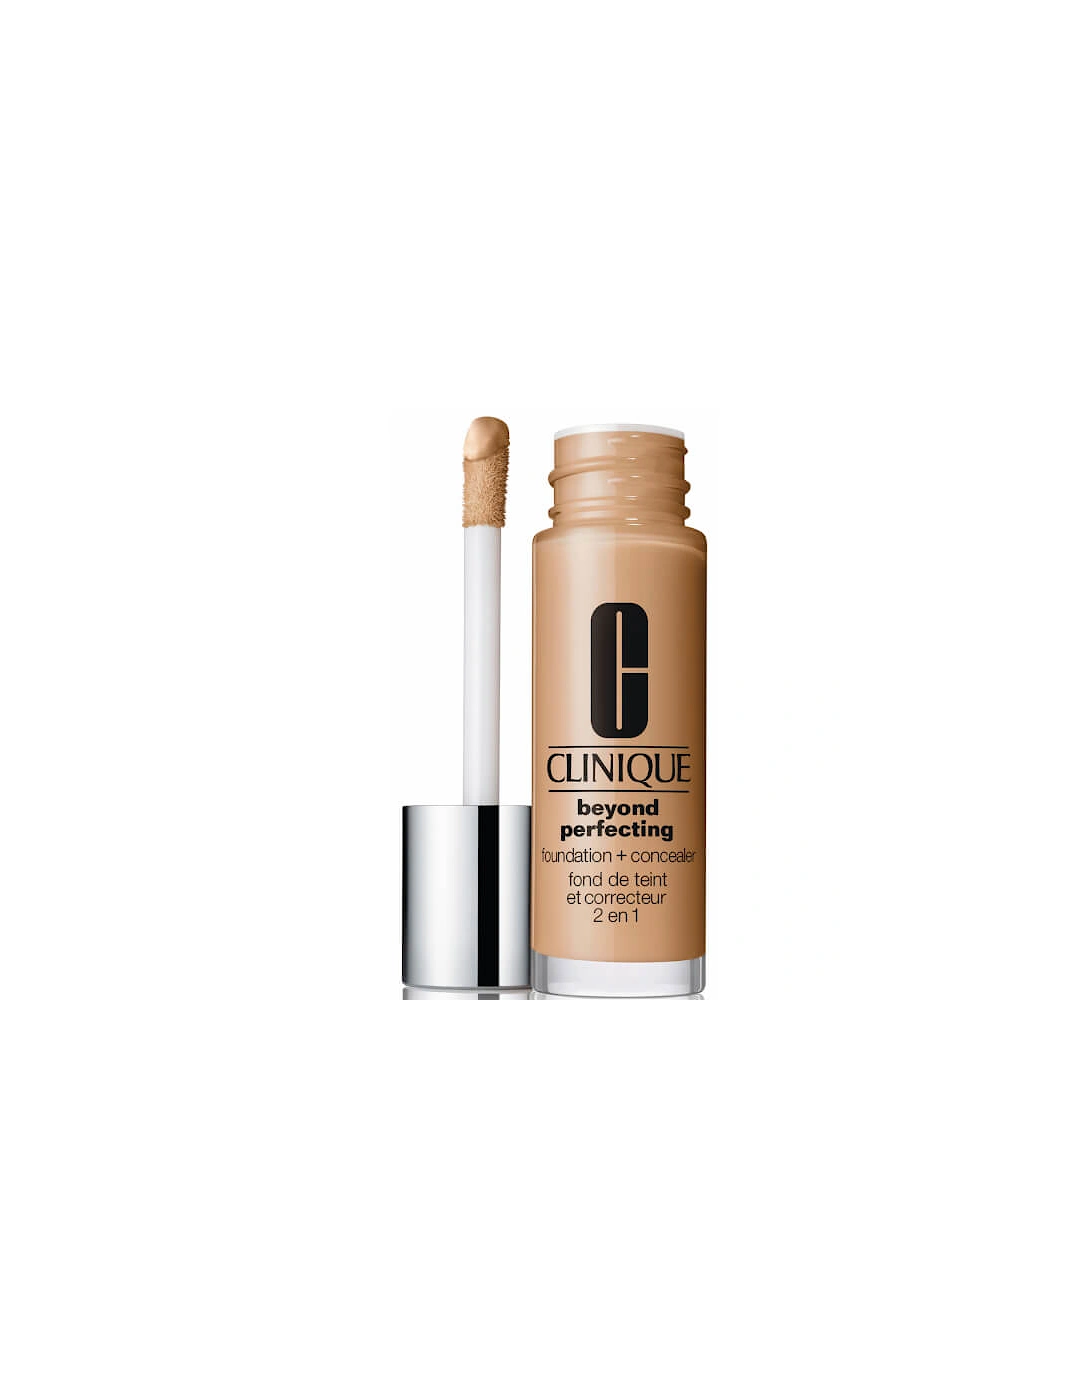 Beyond Perfecting Foundation and Concealer Honey, 2 of 1